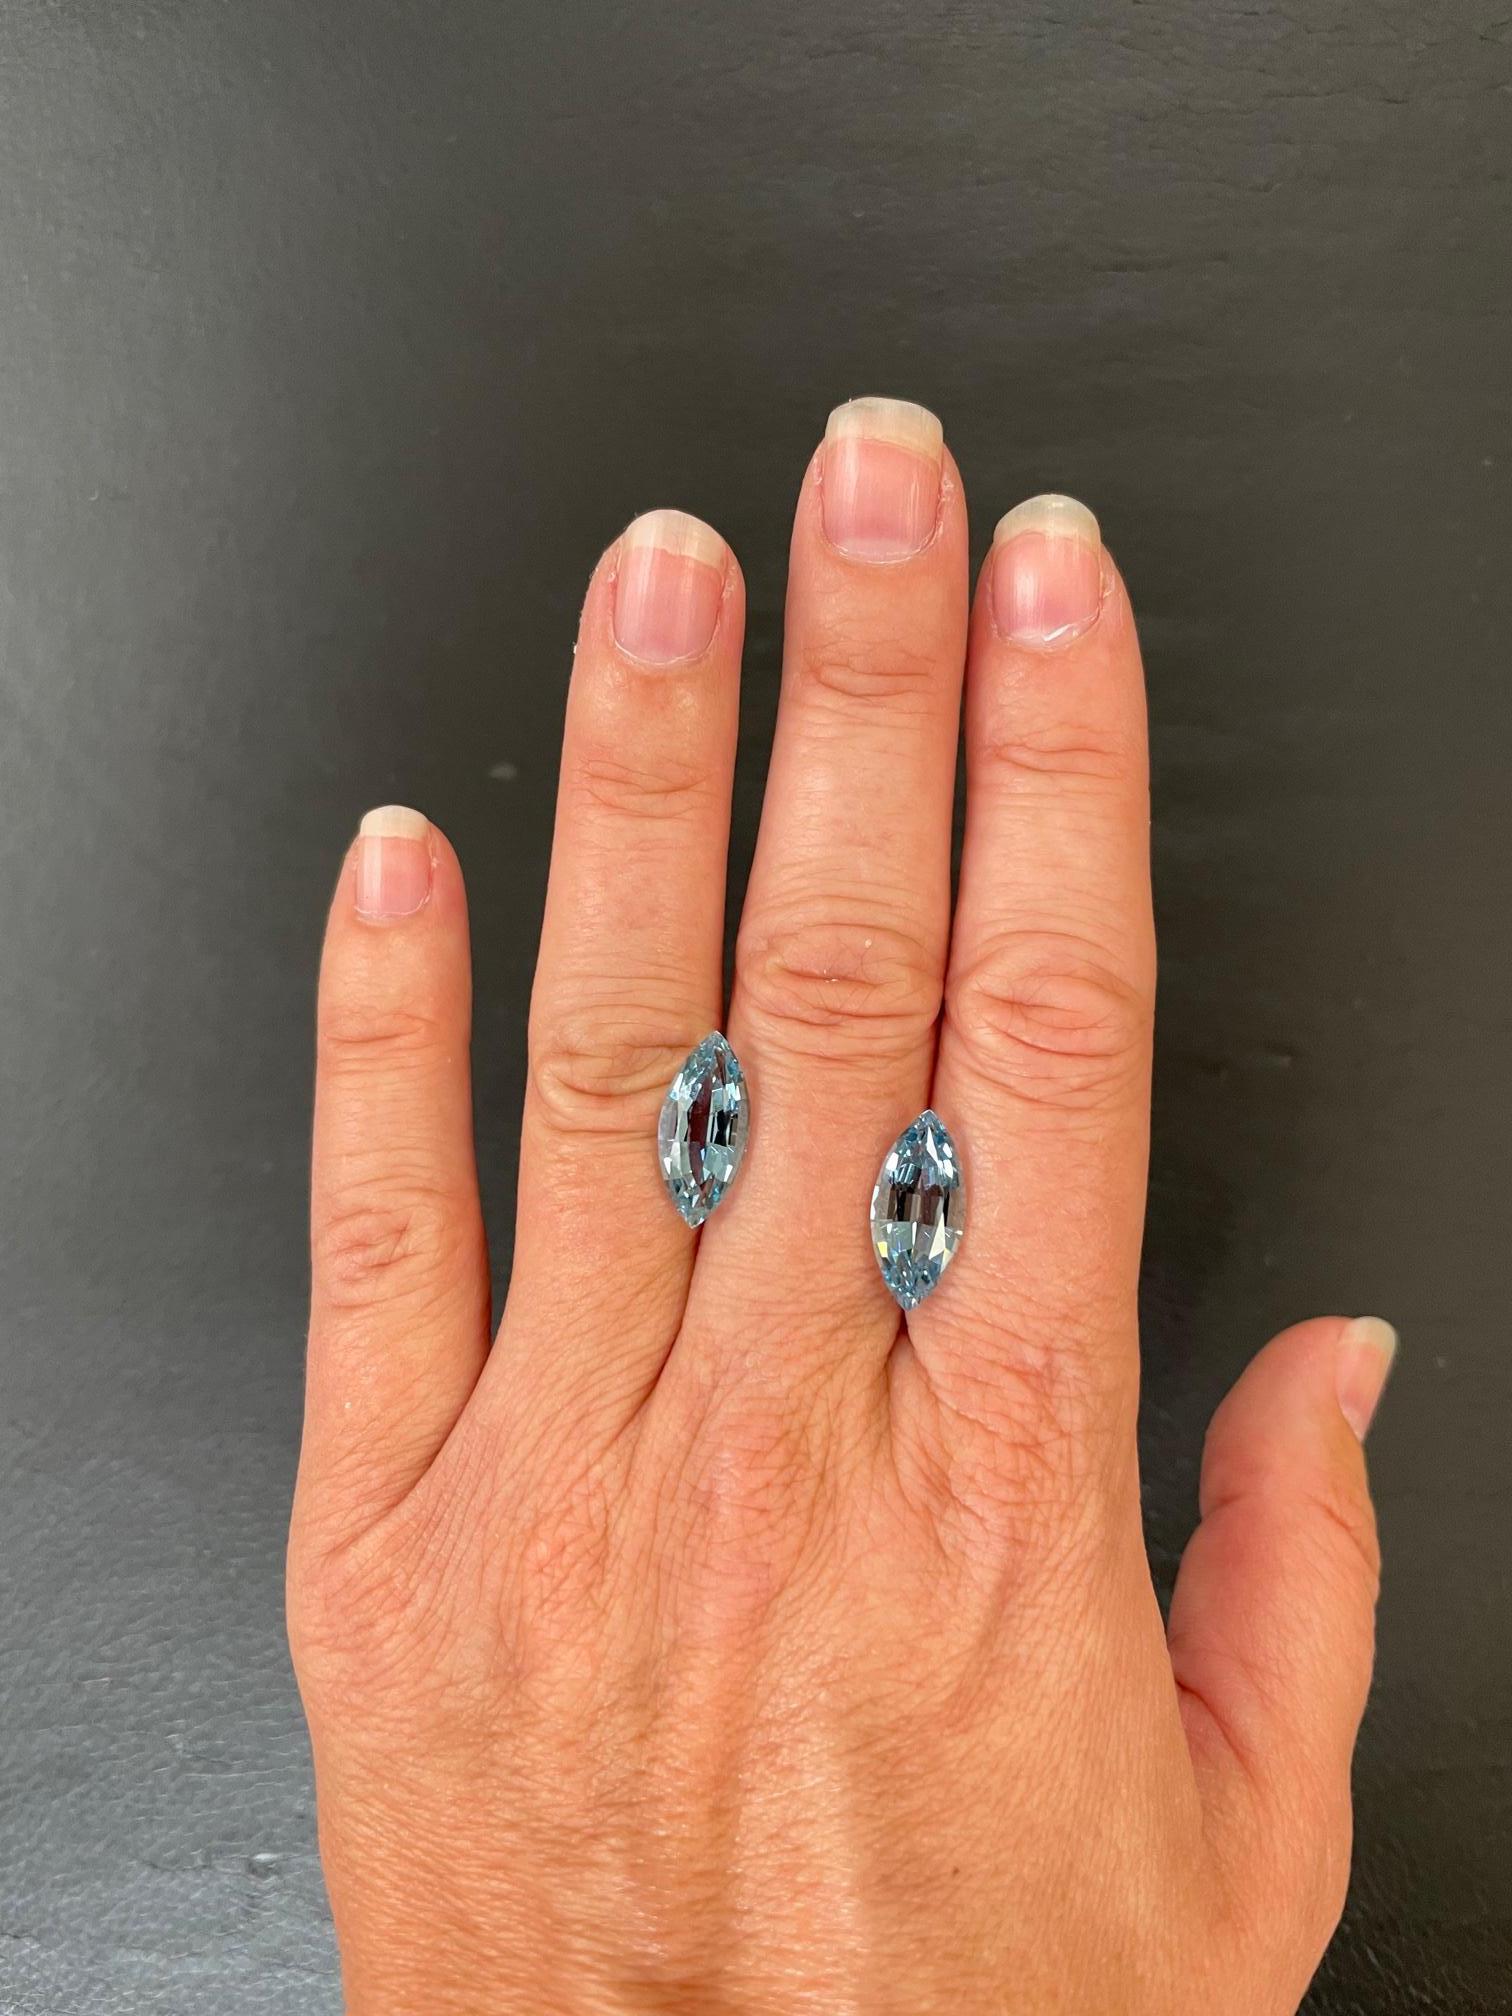 Exclusive pair of 7.75 carats total, marquise Aquamarine gemstones, offered loose for spectacular earrings.
Returns are accepted and paid by us within 7 days of delivery.
We offer supreme custom jewelry work upon request. Please contact us for more